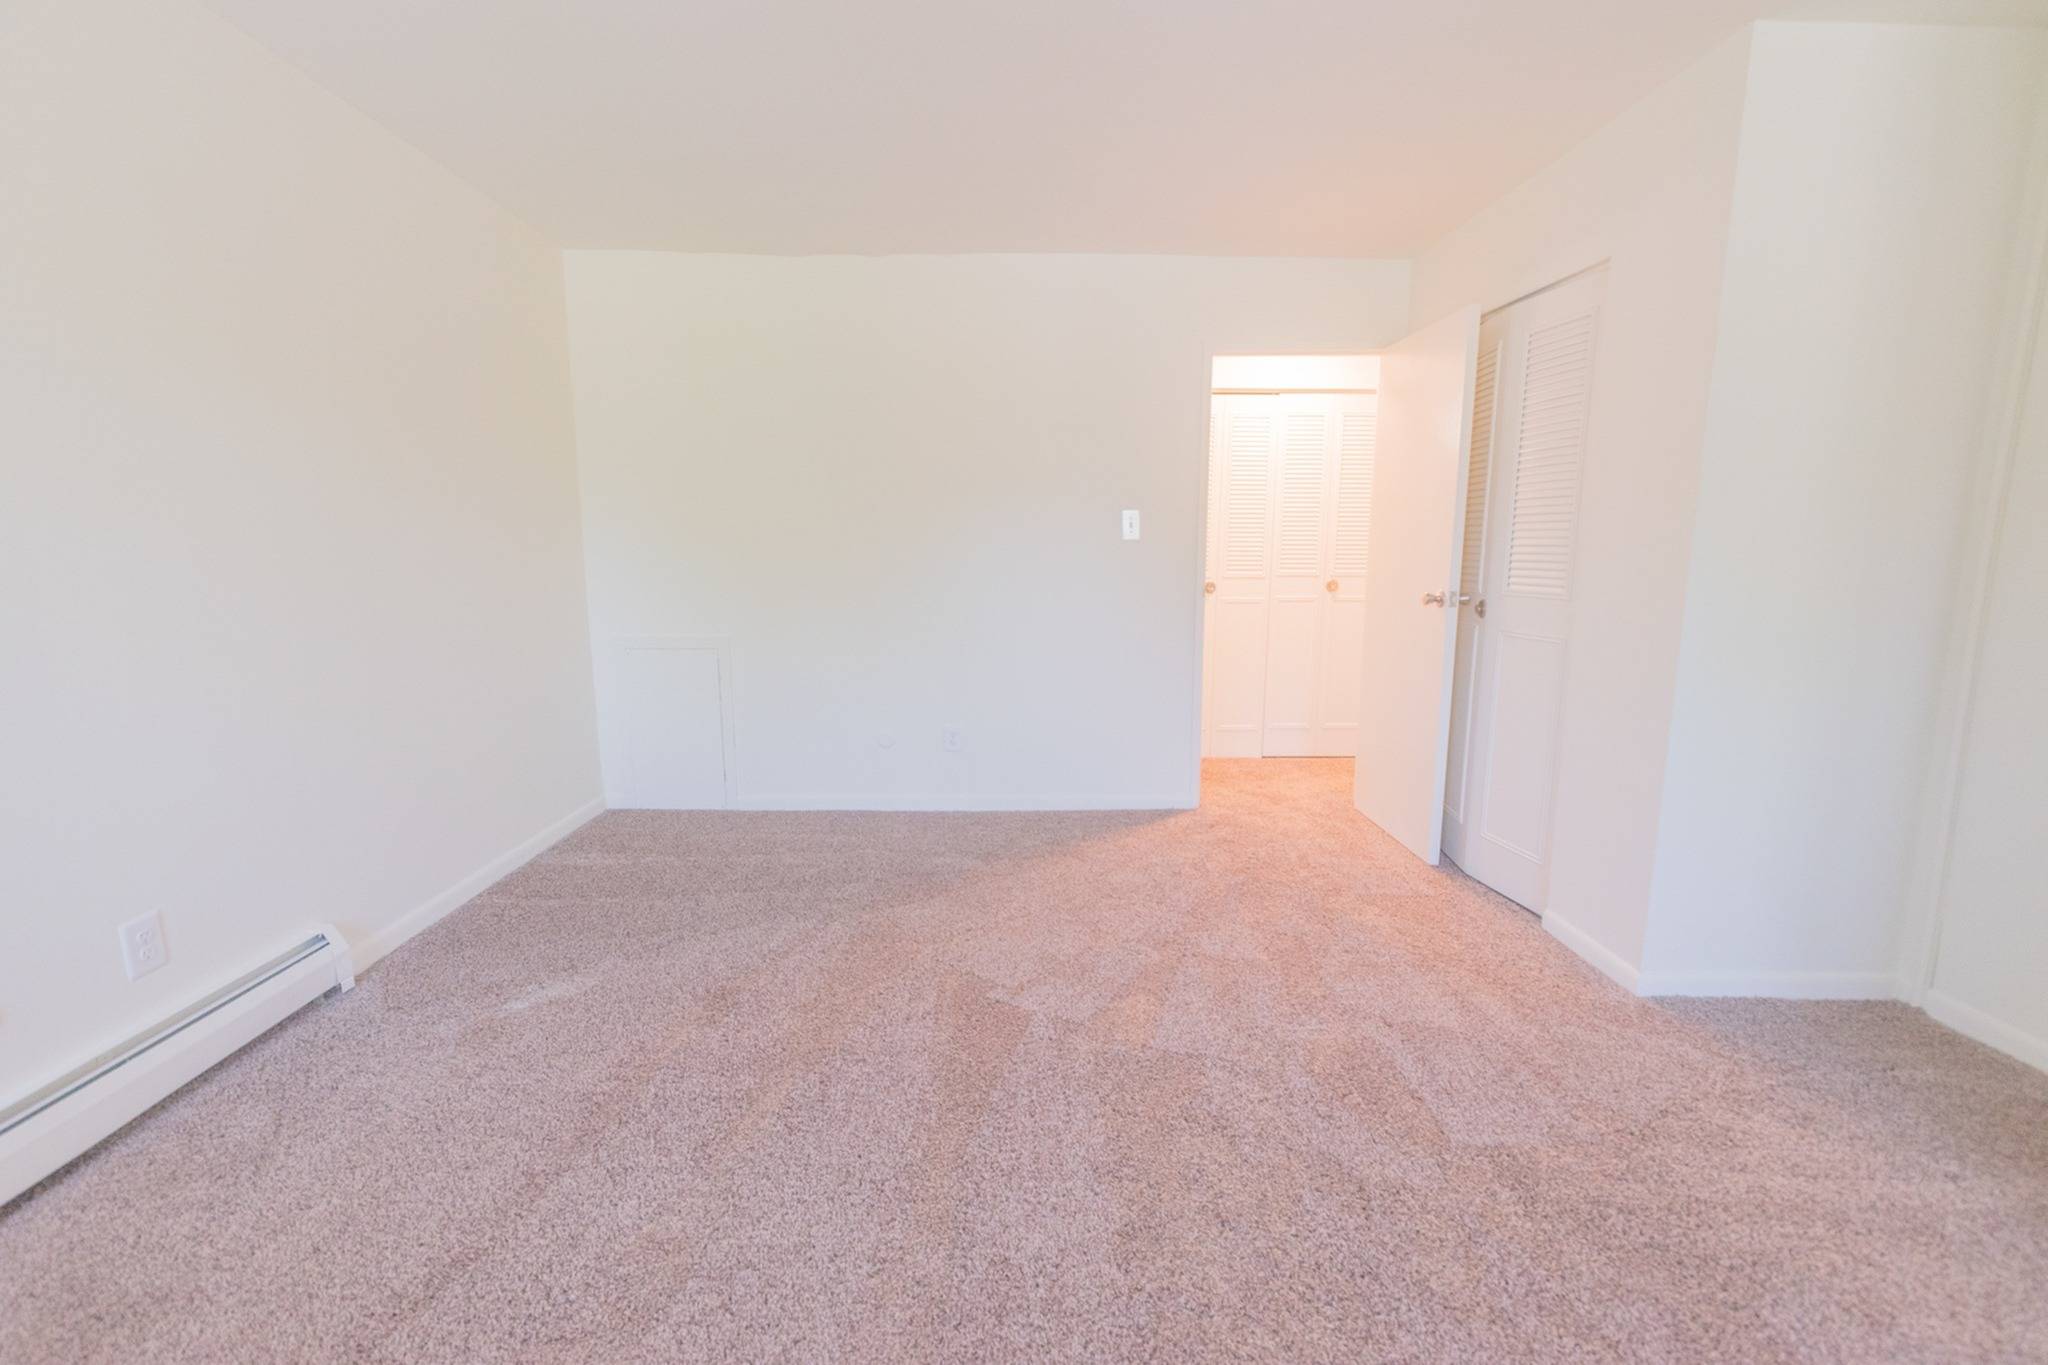 Bedroom area of an apartment unfurnished, fitted with carpet flooring, and a high ceiling